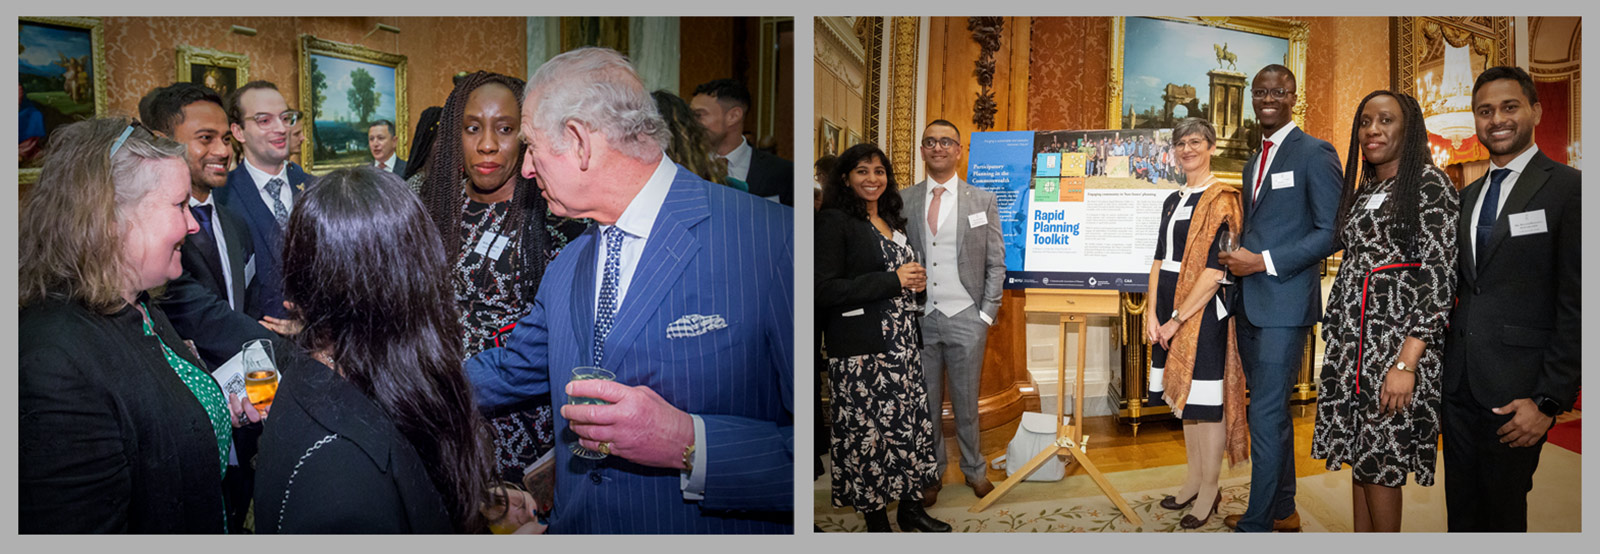 Malith is (pictured left) being welcomed by His Majesty The King and his research (pictured right) being showcased at the reception